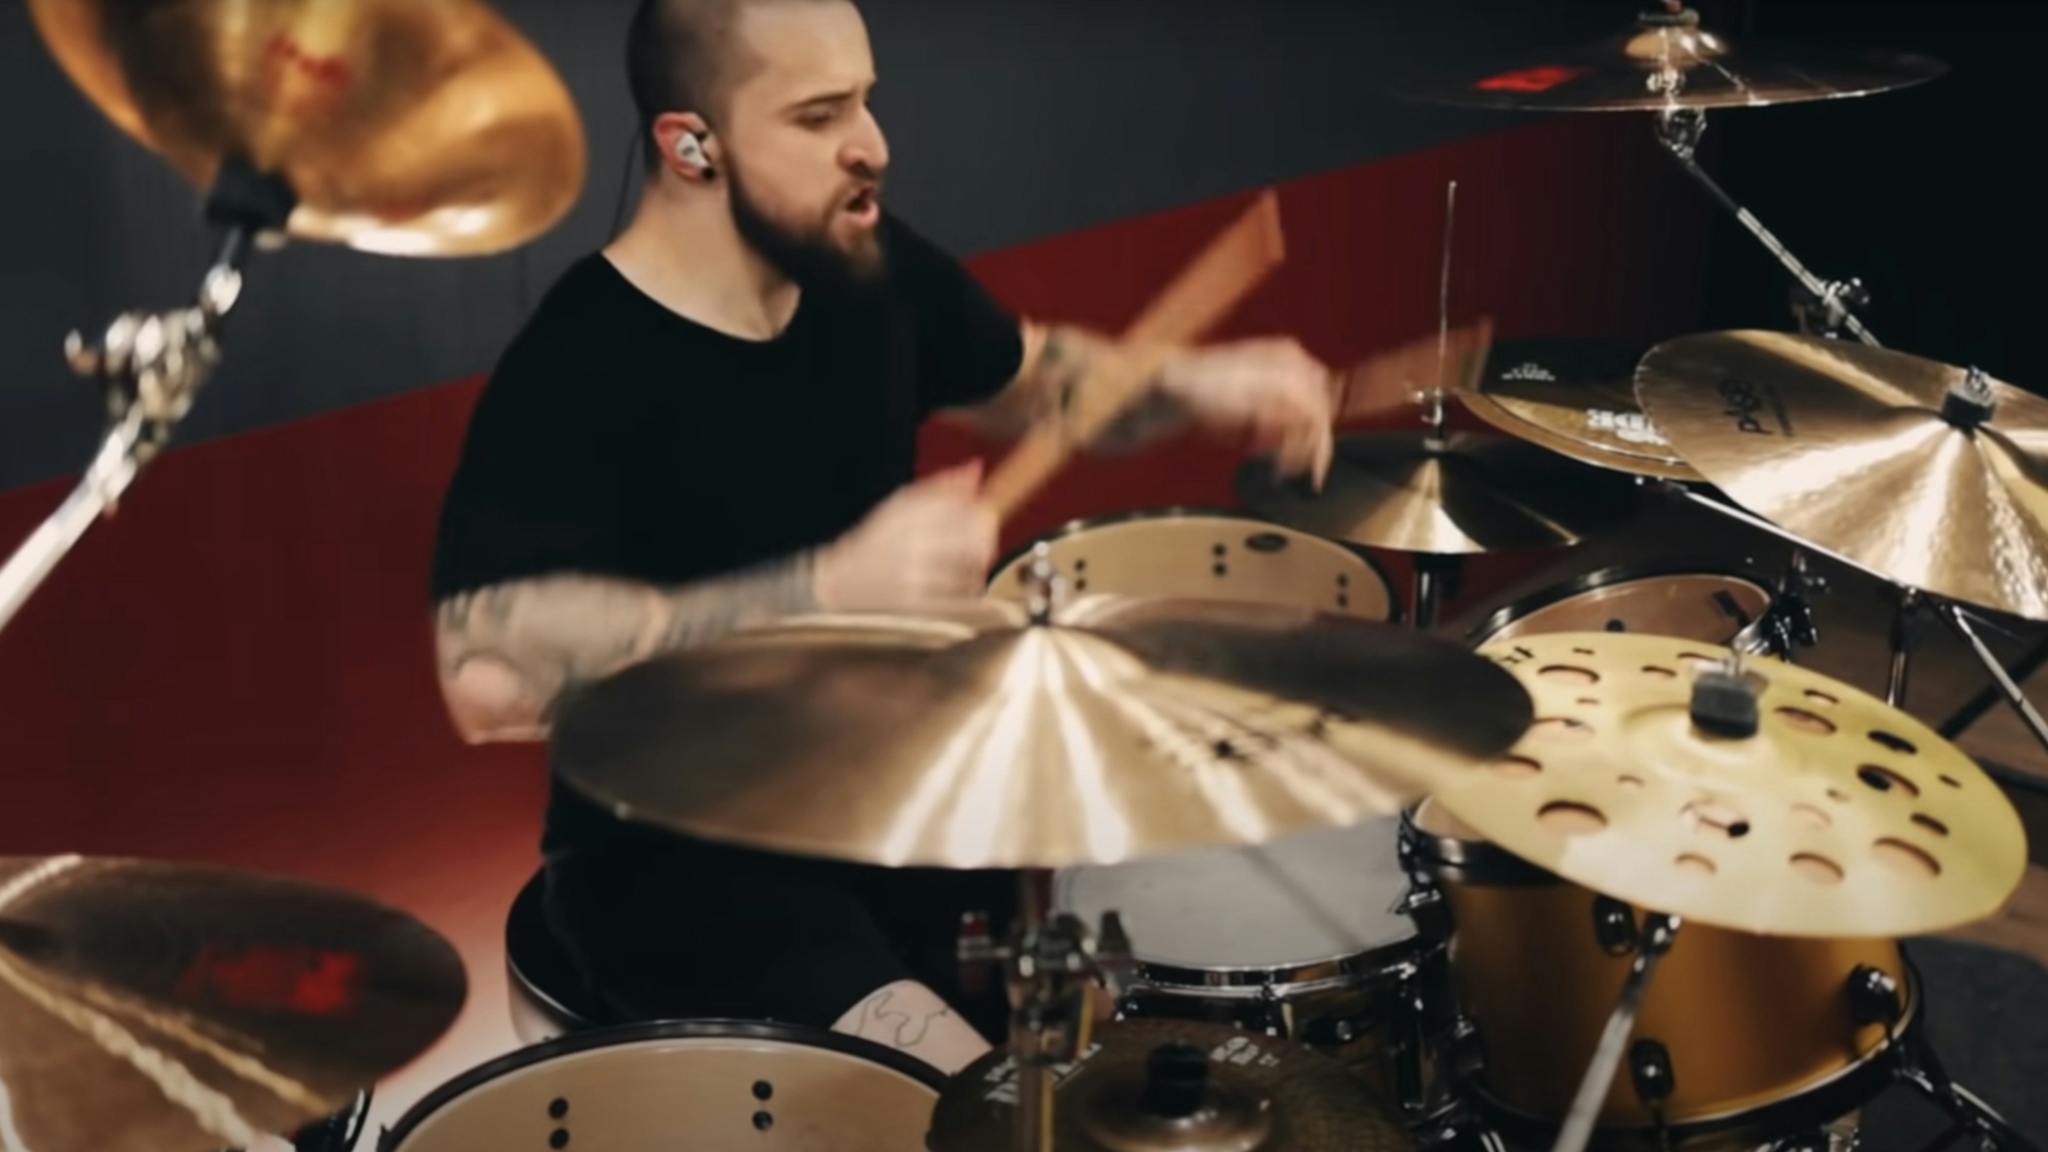 Watch these incredible old YouTube videos of Eloy Casagrande’s Slipknot drum covers